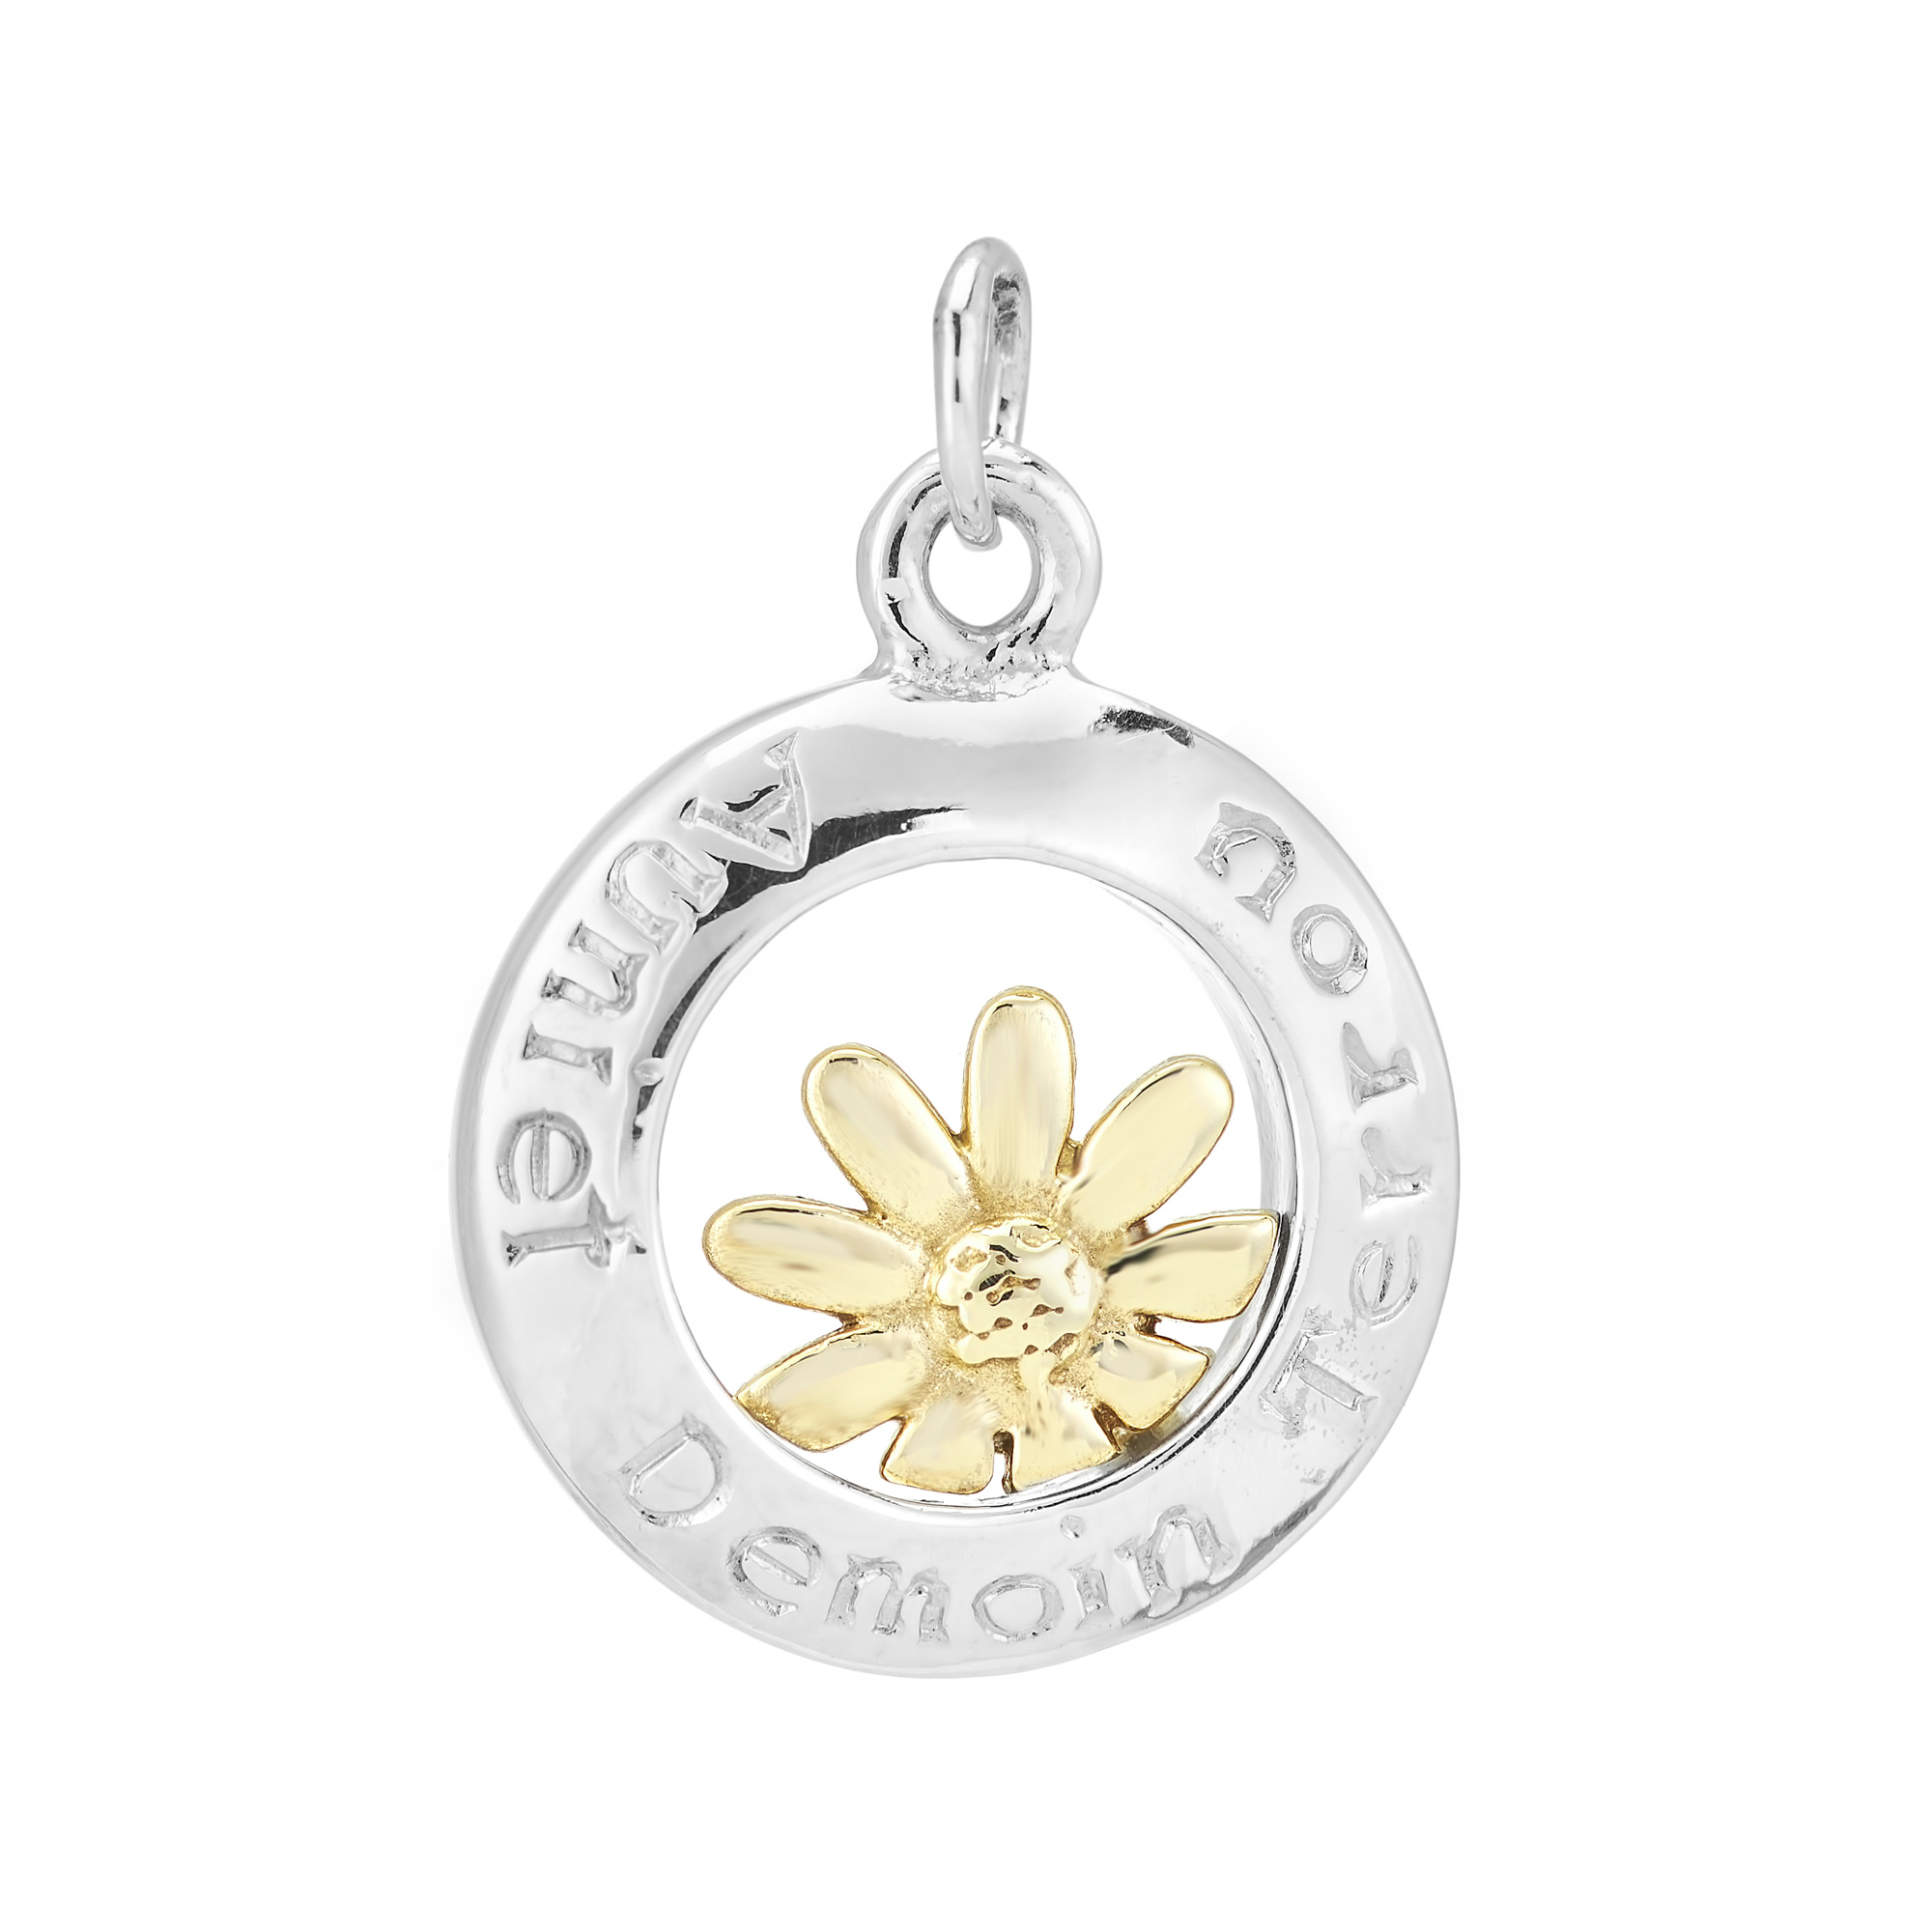 Sterling Silver and 9ct Yellow Gold Charm / Pendant (Today Tomorrow Always)